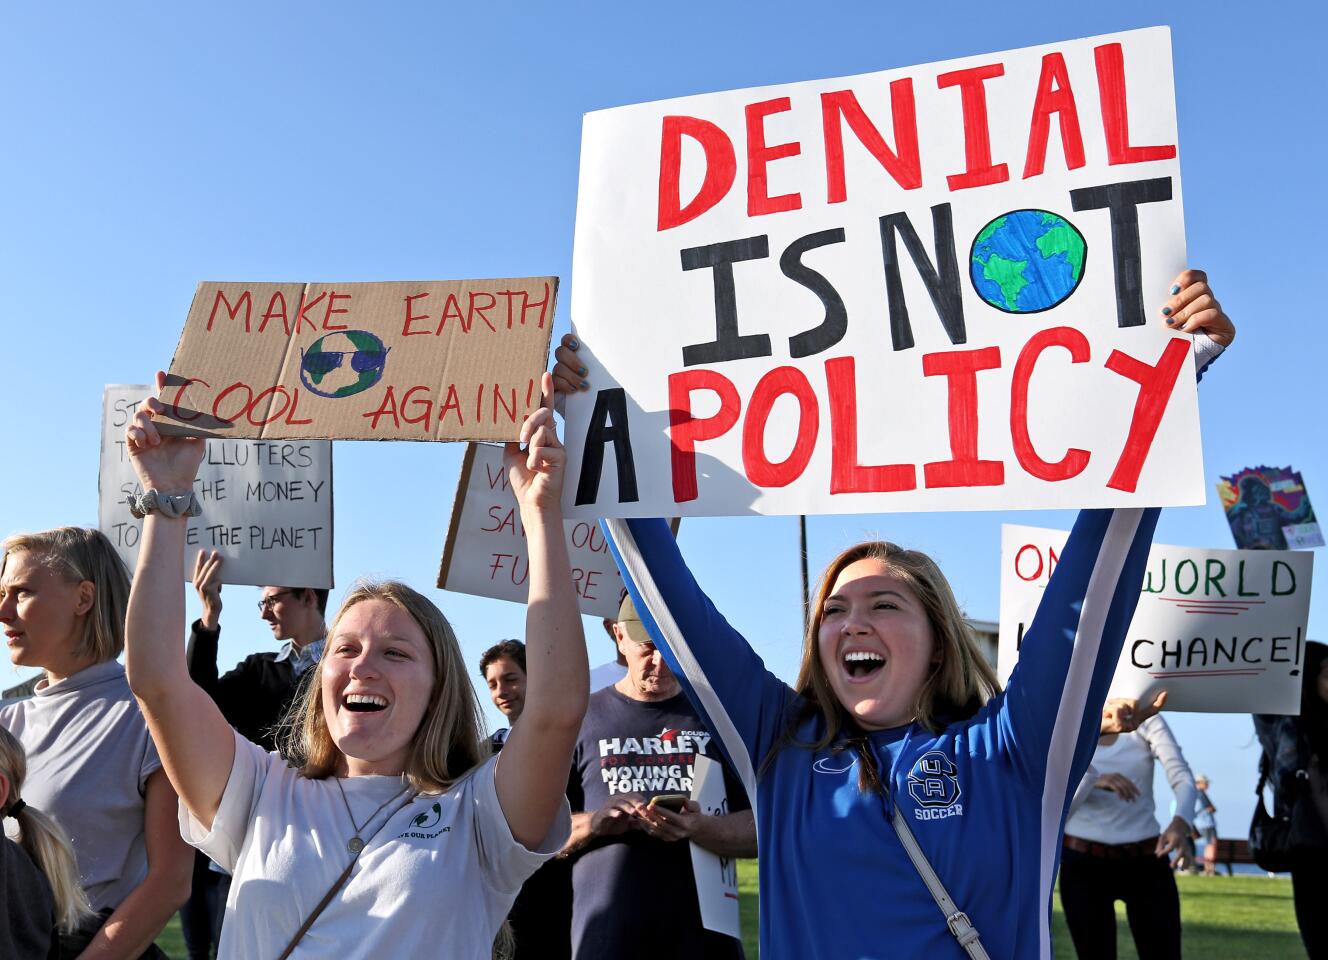 Jordan Pritzl of Aliso Viejo, left, and Merina Addonigio, both from Suka University, hold protest signs during the Climate Strike climate change protest, at Main Beach Park in Laguna Beach on Friday, Sept. 20, 2019. People throughout the world came out today to protest against climate change.